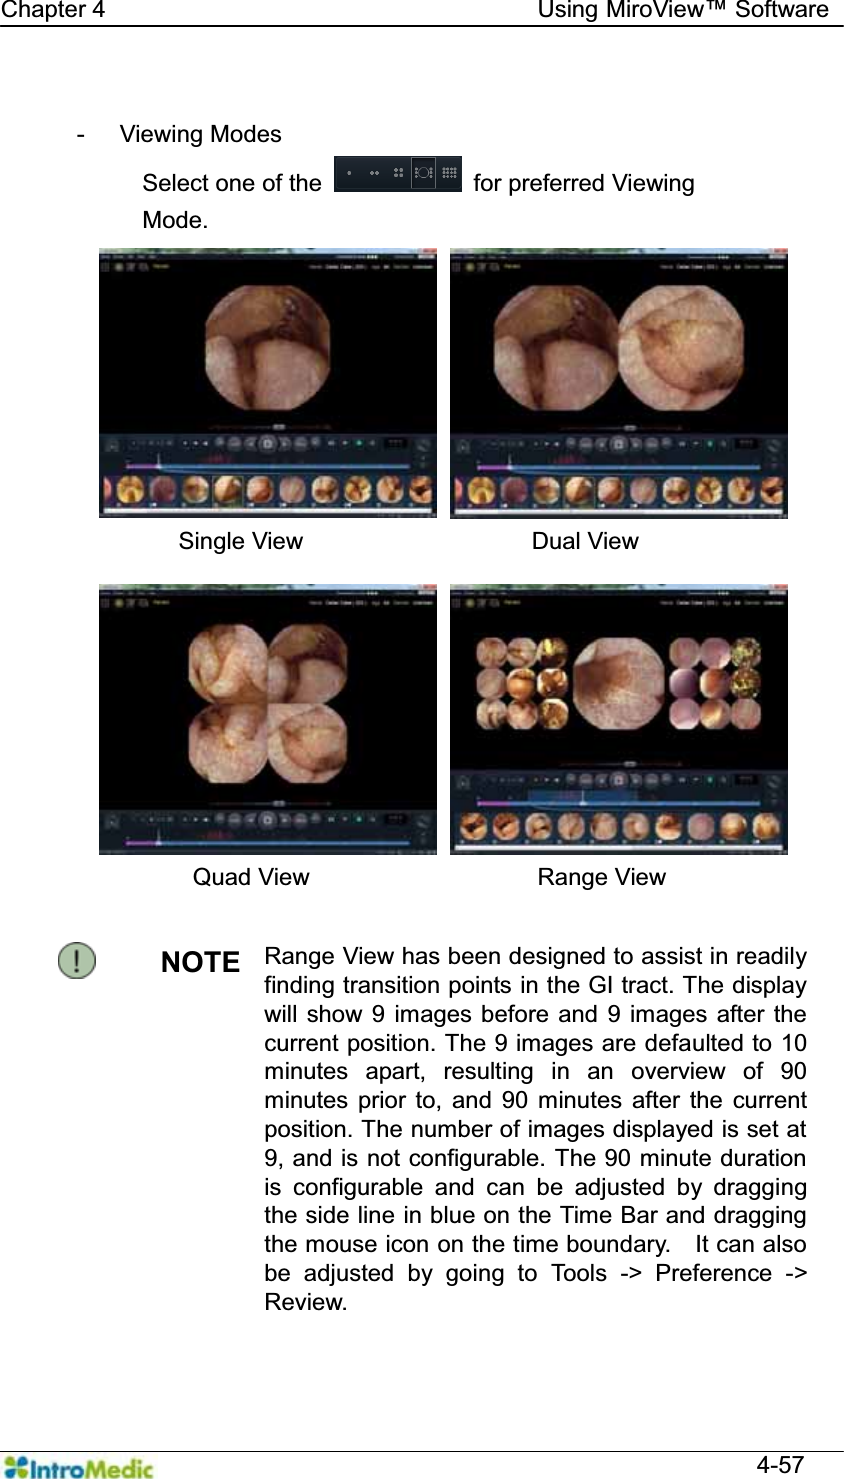   Chapter 4                                    Using 0LUR9LHZ Software  4-57  - Viewing Modes   Select one of the   for preferred Viewing     Mode.  Single View                   Dual View Quad View                   Range View  NOTE  Range View has been designed to assist in readily finding transition points in the GI tract. The display will show 9 images before and 9 images after the current position. The 9 images are defaulted to 10 minutes apart, resulting in an overview of 90 minutes prior to, and 90 minutes after the current position. The number of images displayed is set at 9, and is not configurable. The 90 minute duration is configurable and can be adjusted by dragging the side line in blue on the Time Bar and dragging the mouse icon on the time boundary.    It can also be adjusted by going to Tools -&gt; Preference -&gt; Review.  